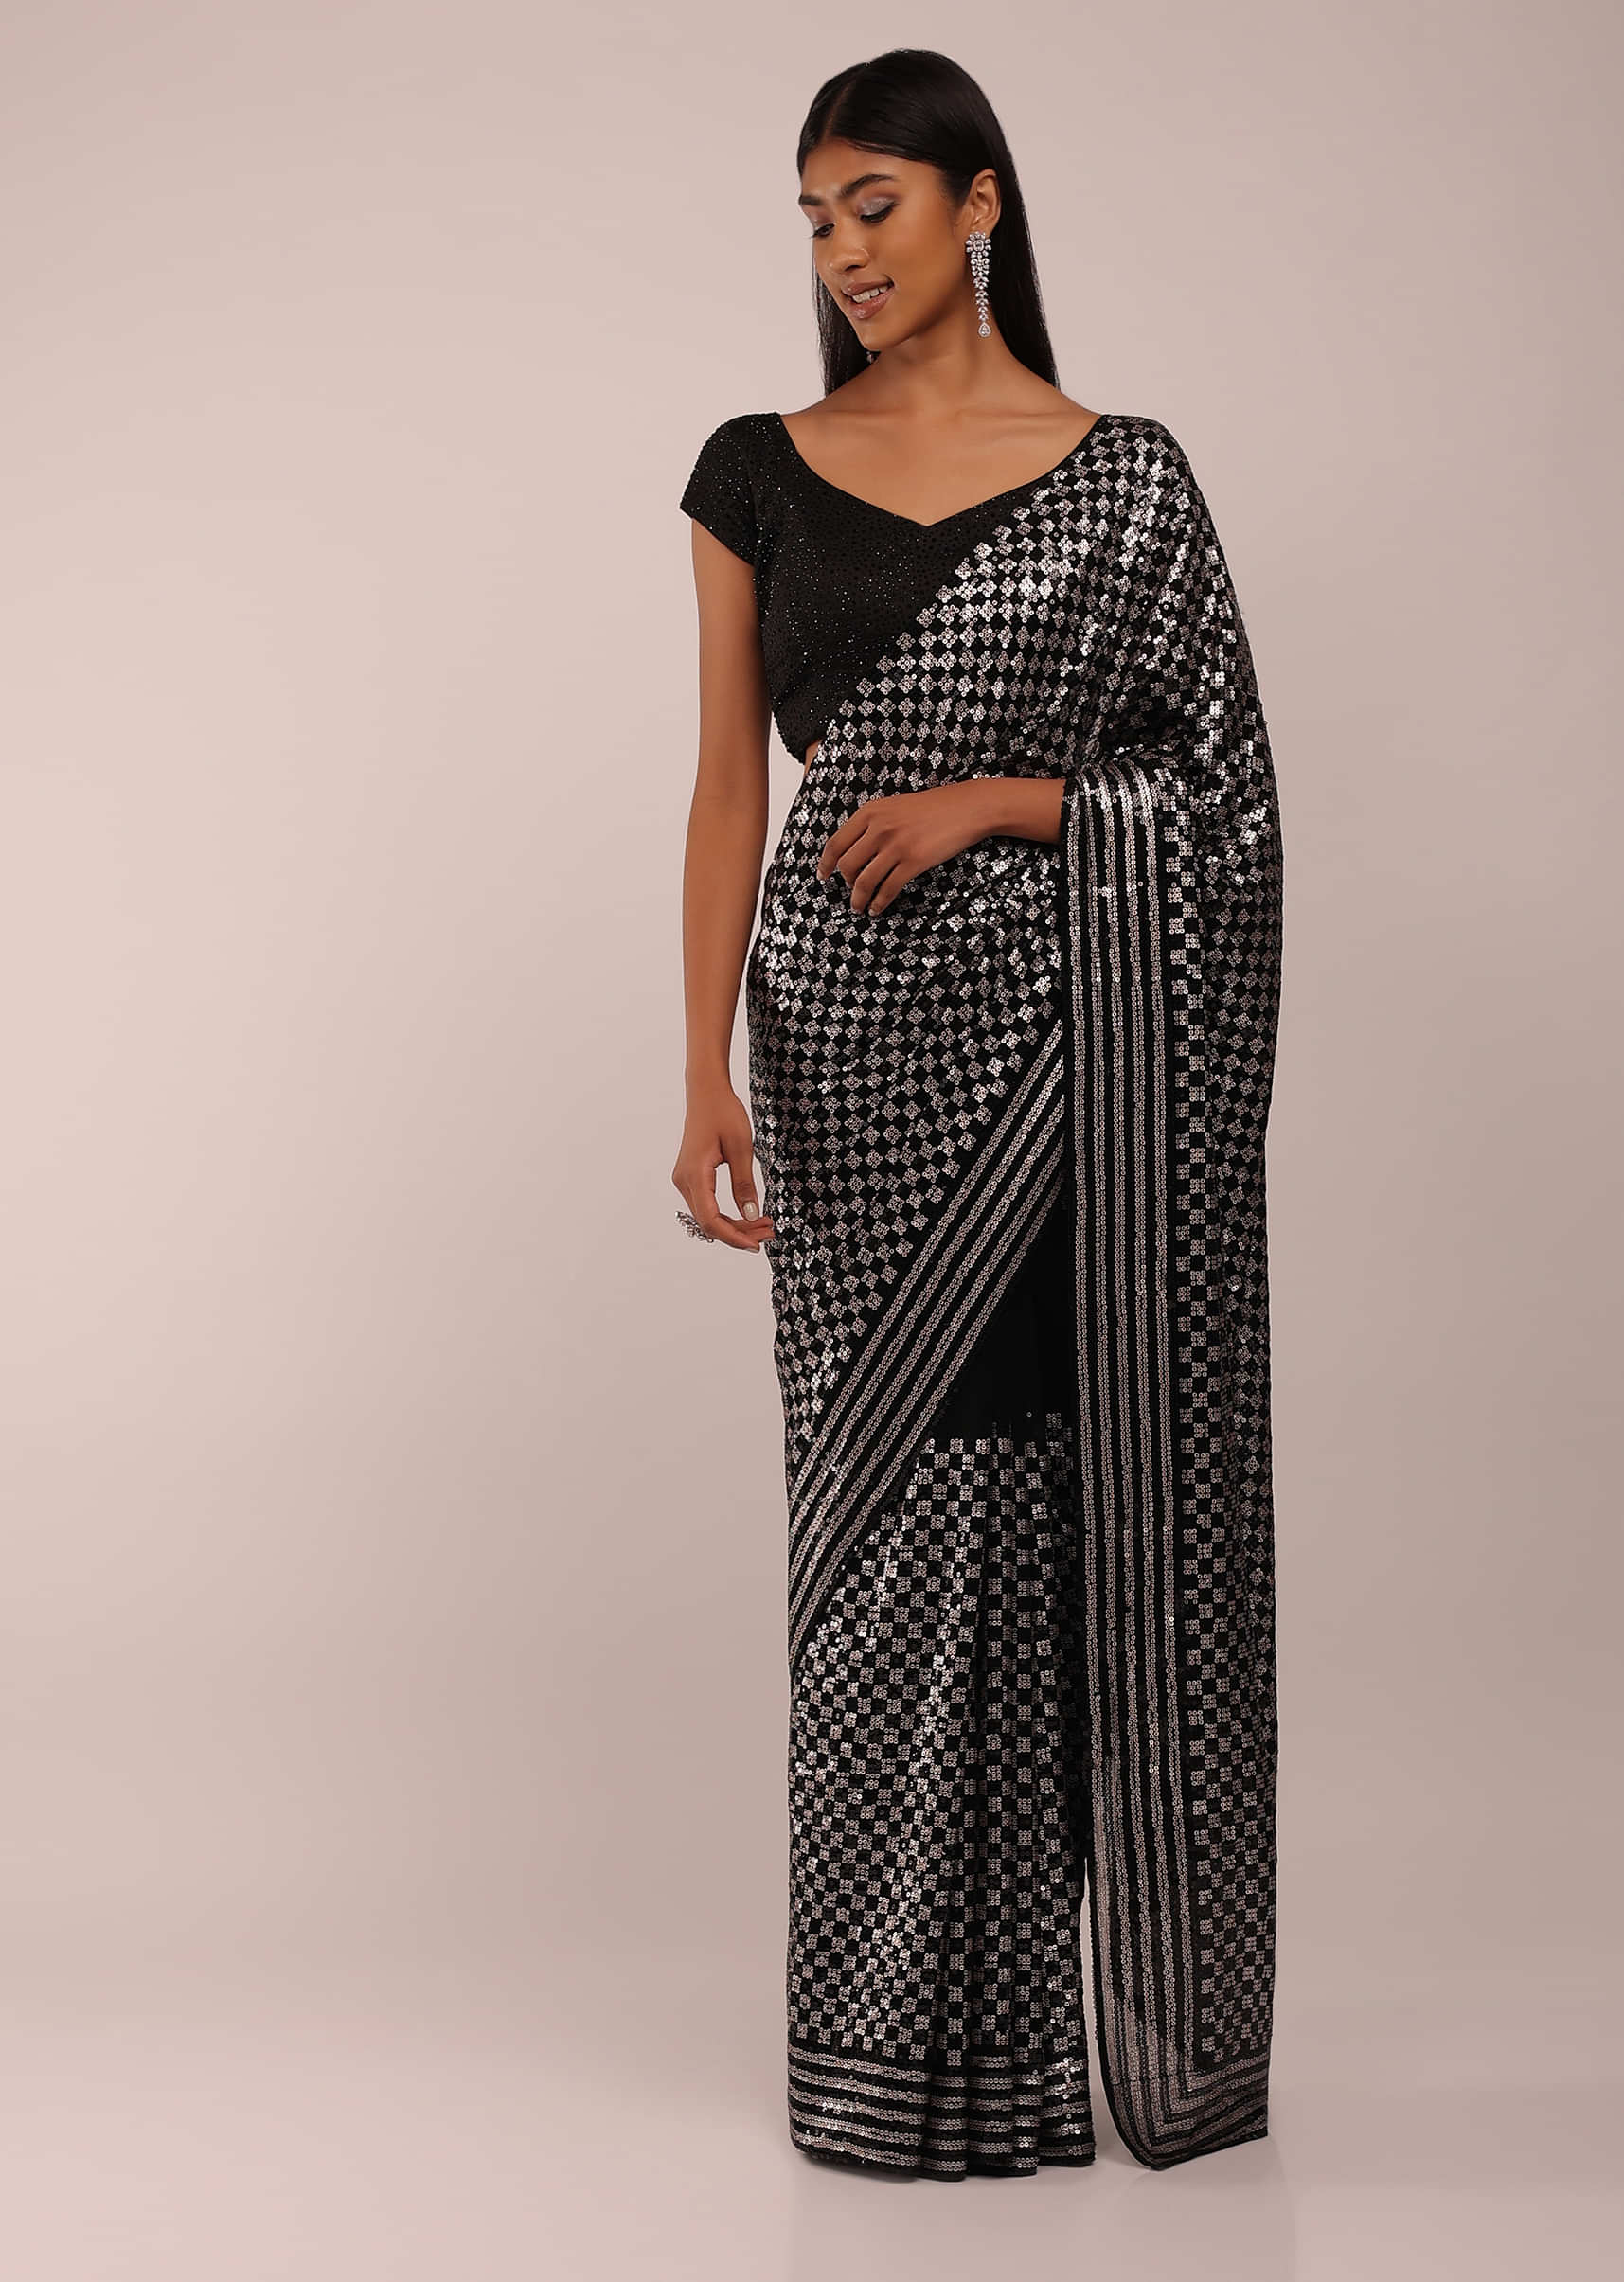 Ink Black Chiffon Saree In Blue And Black Sequins Embroidery In Geometrical Motifs In A ChecksJaal